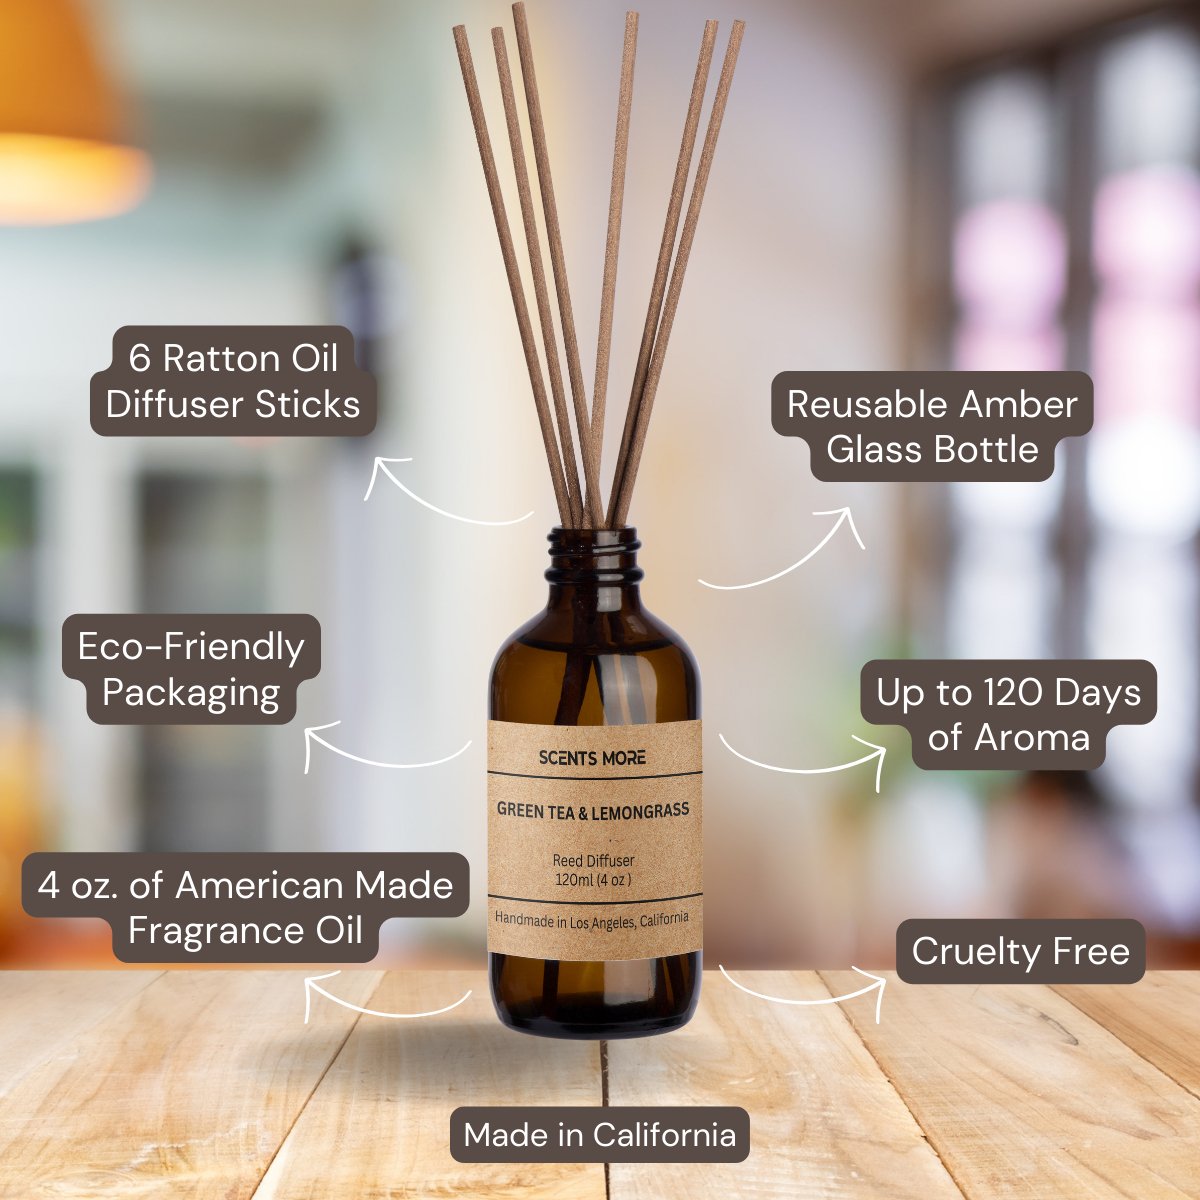 Green Tea & Lemongrass Reed Diffuser - Scents More